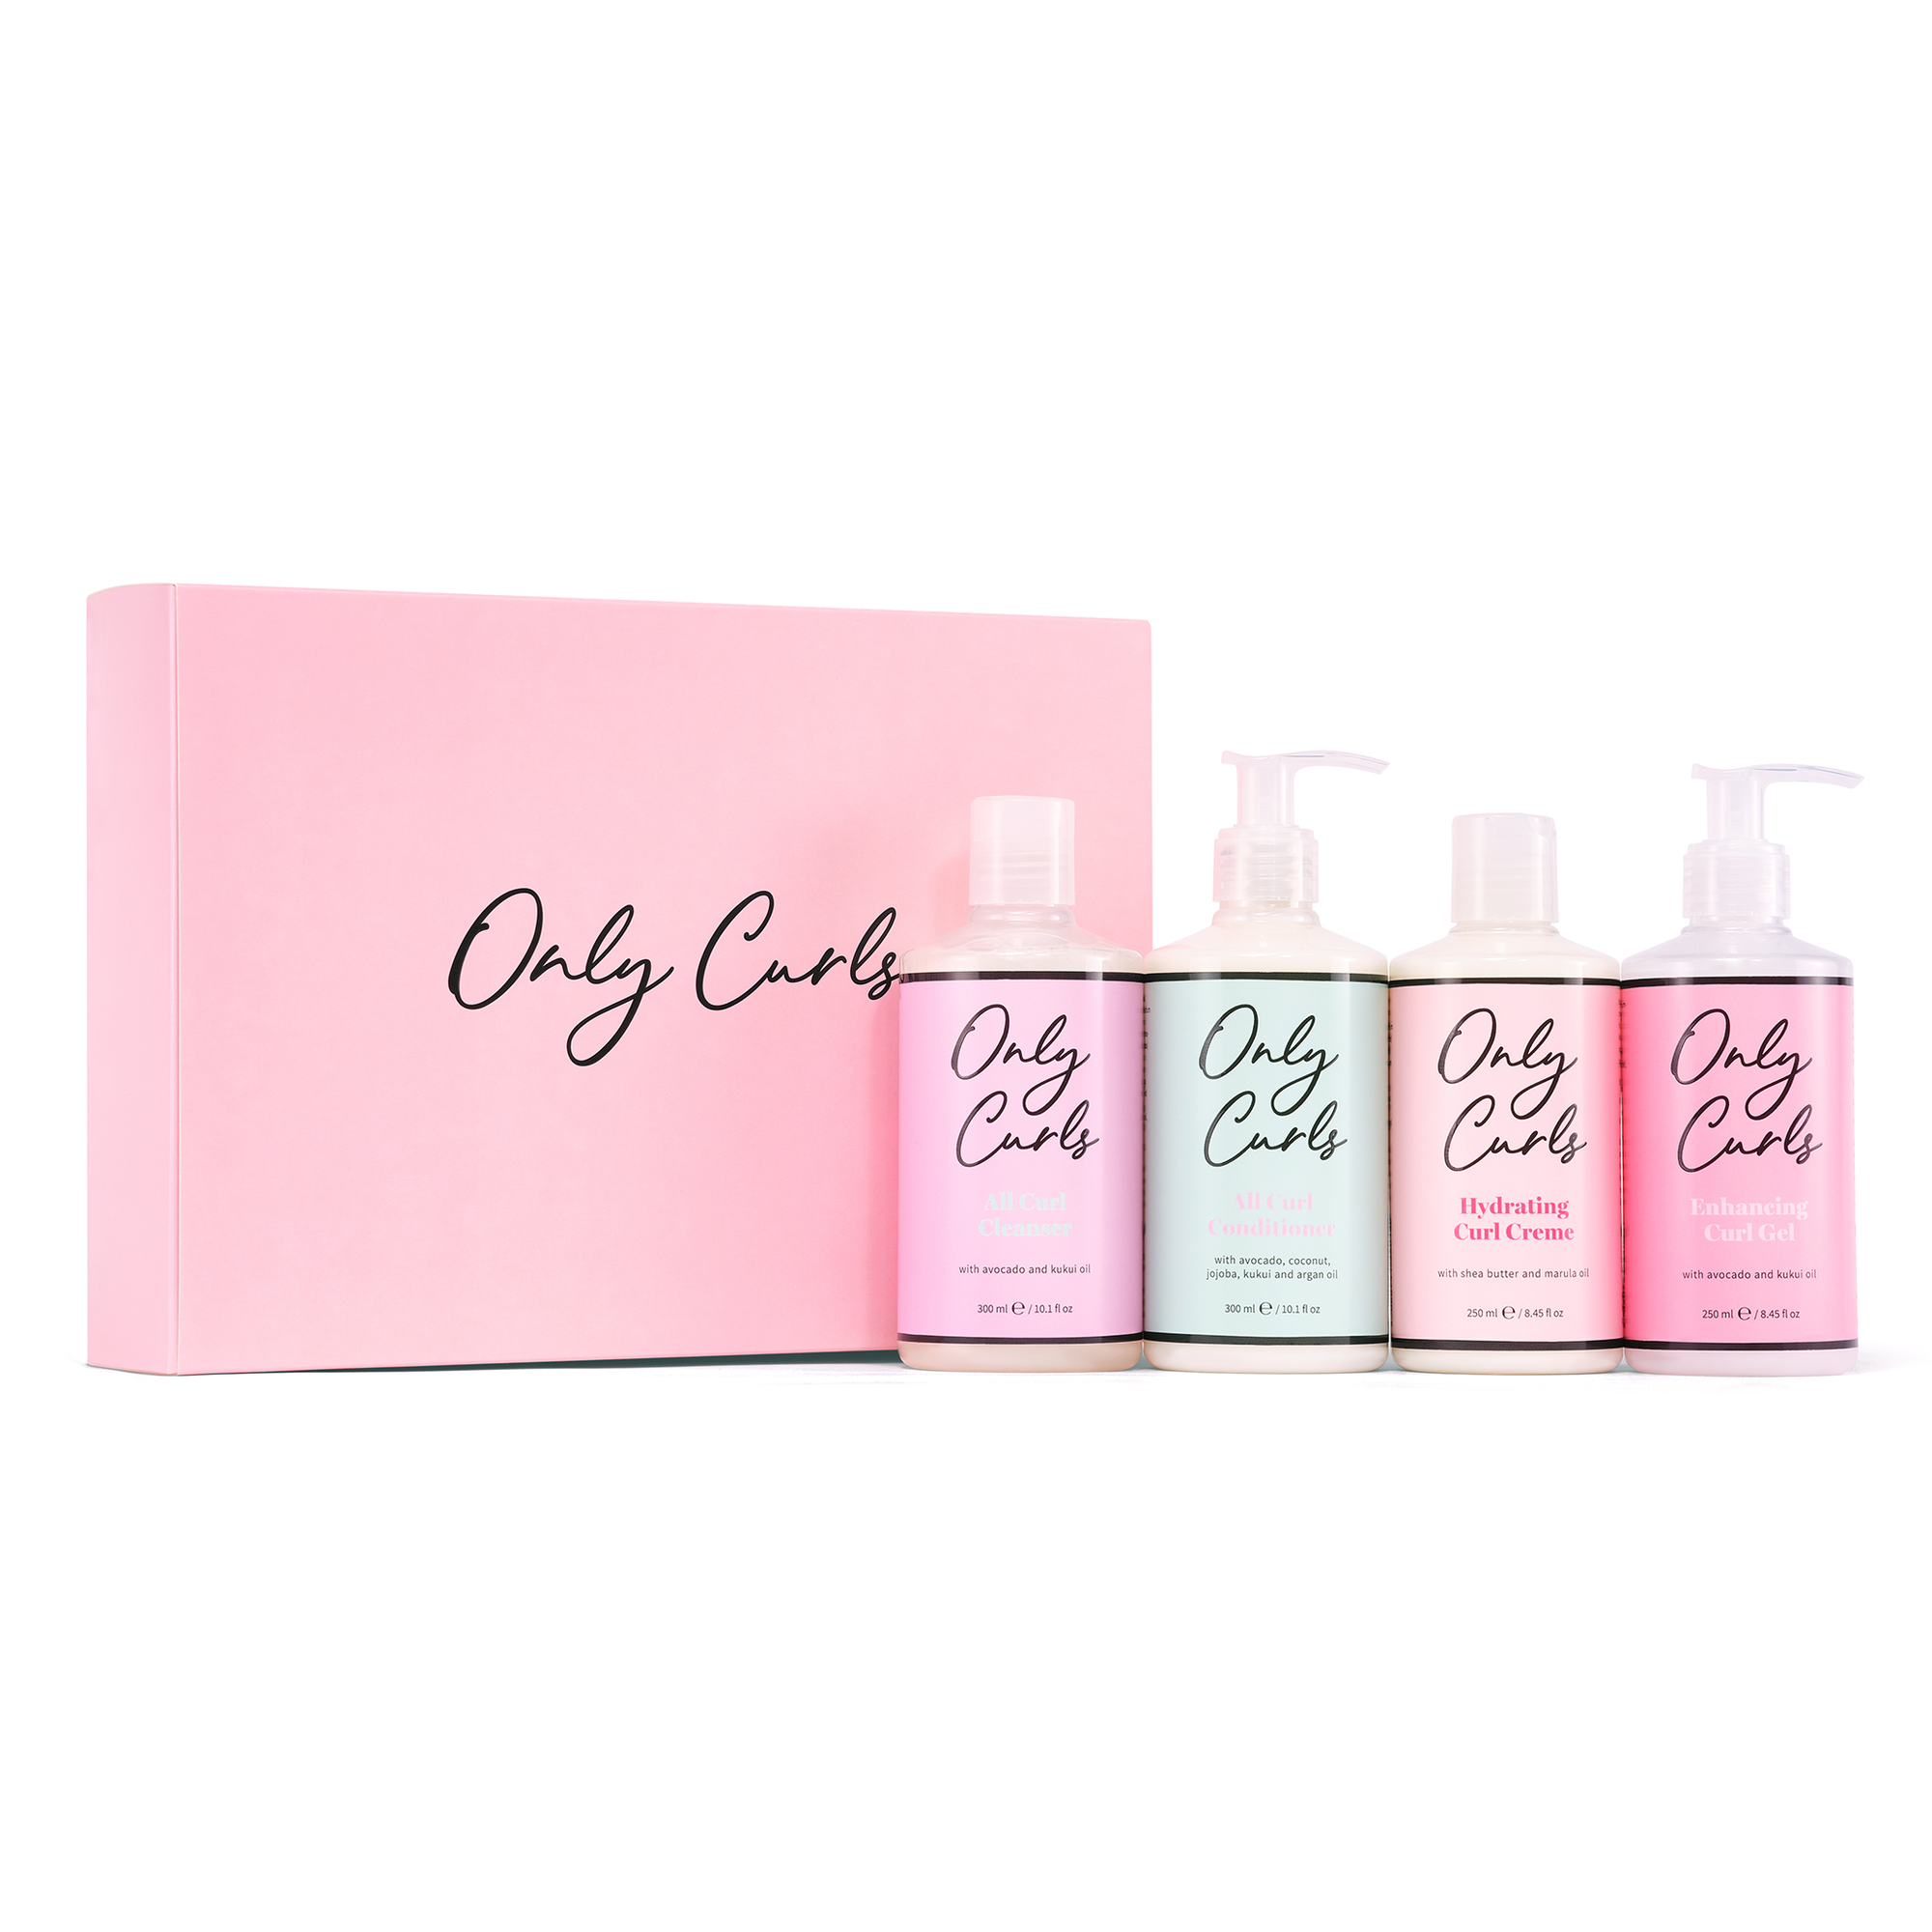 Only Curls Full Size Collection Bottles and Gift Set